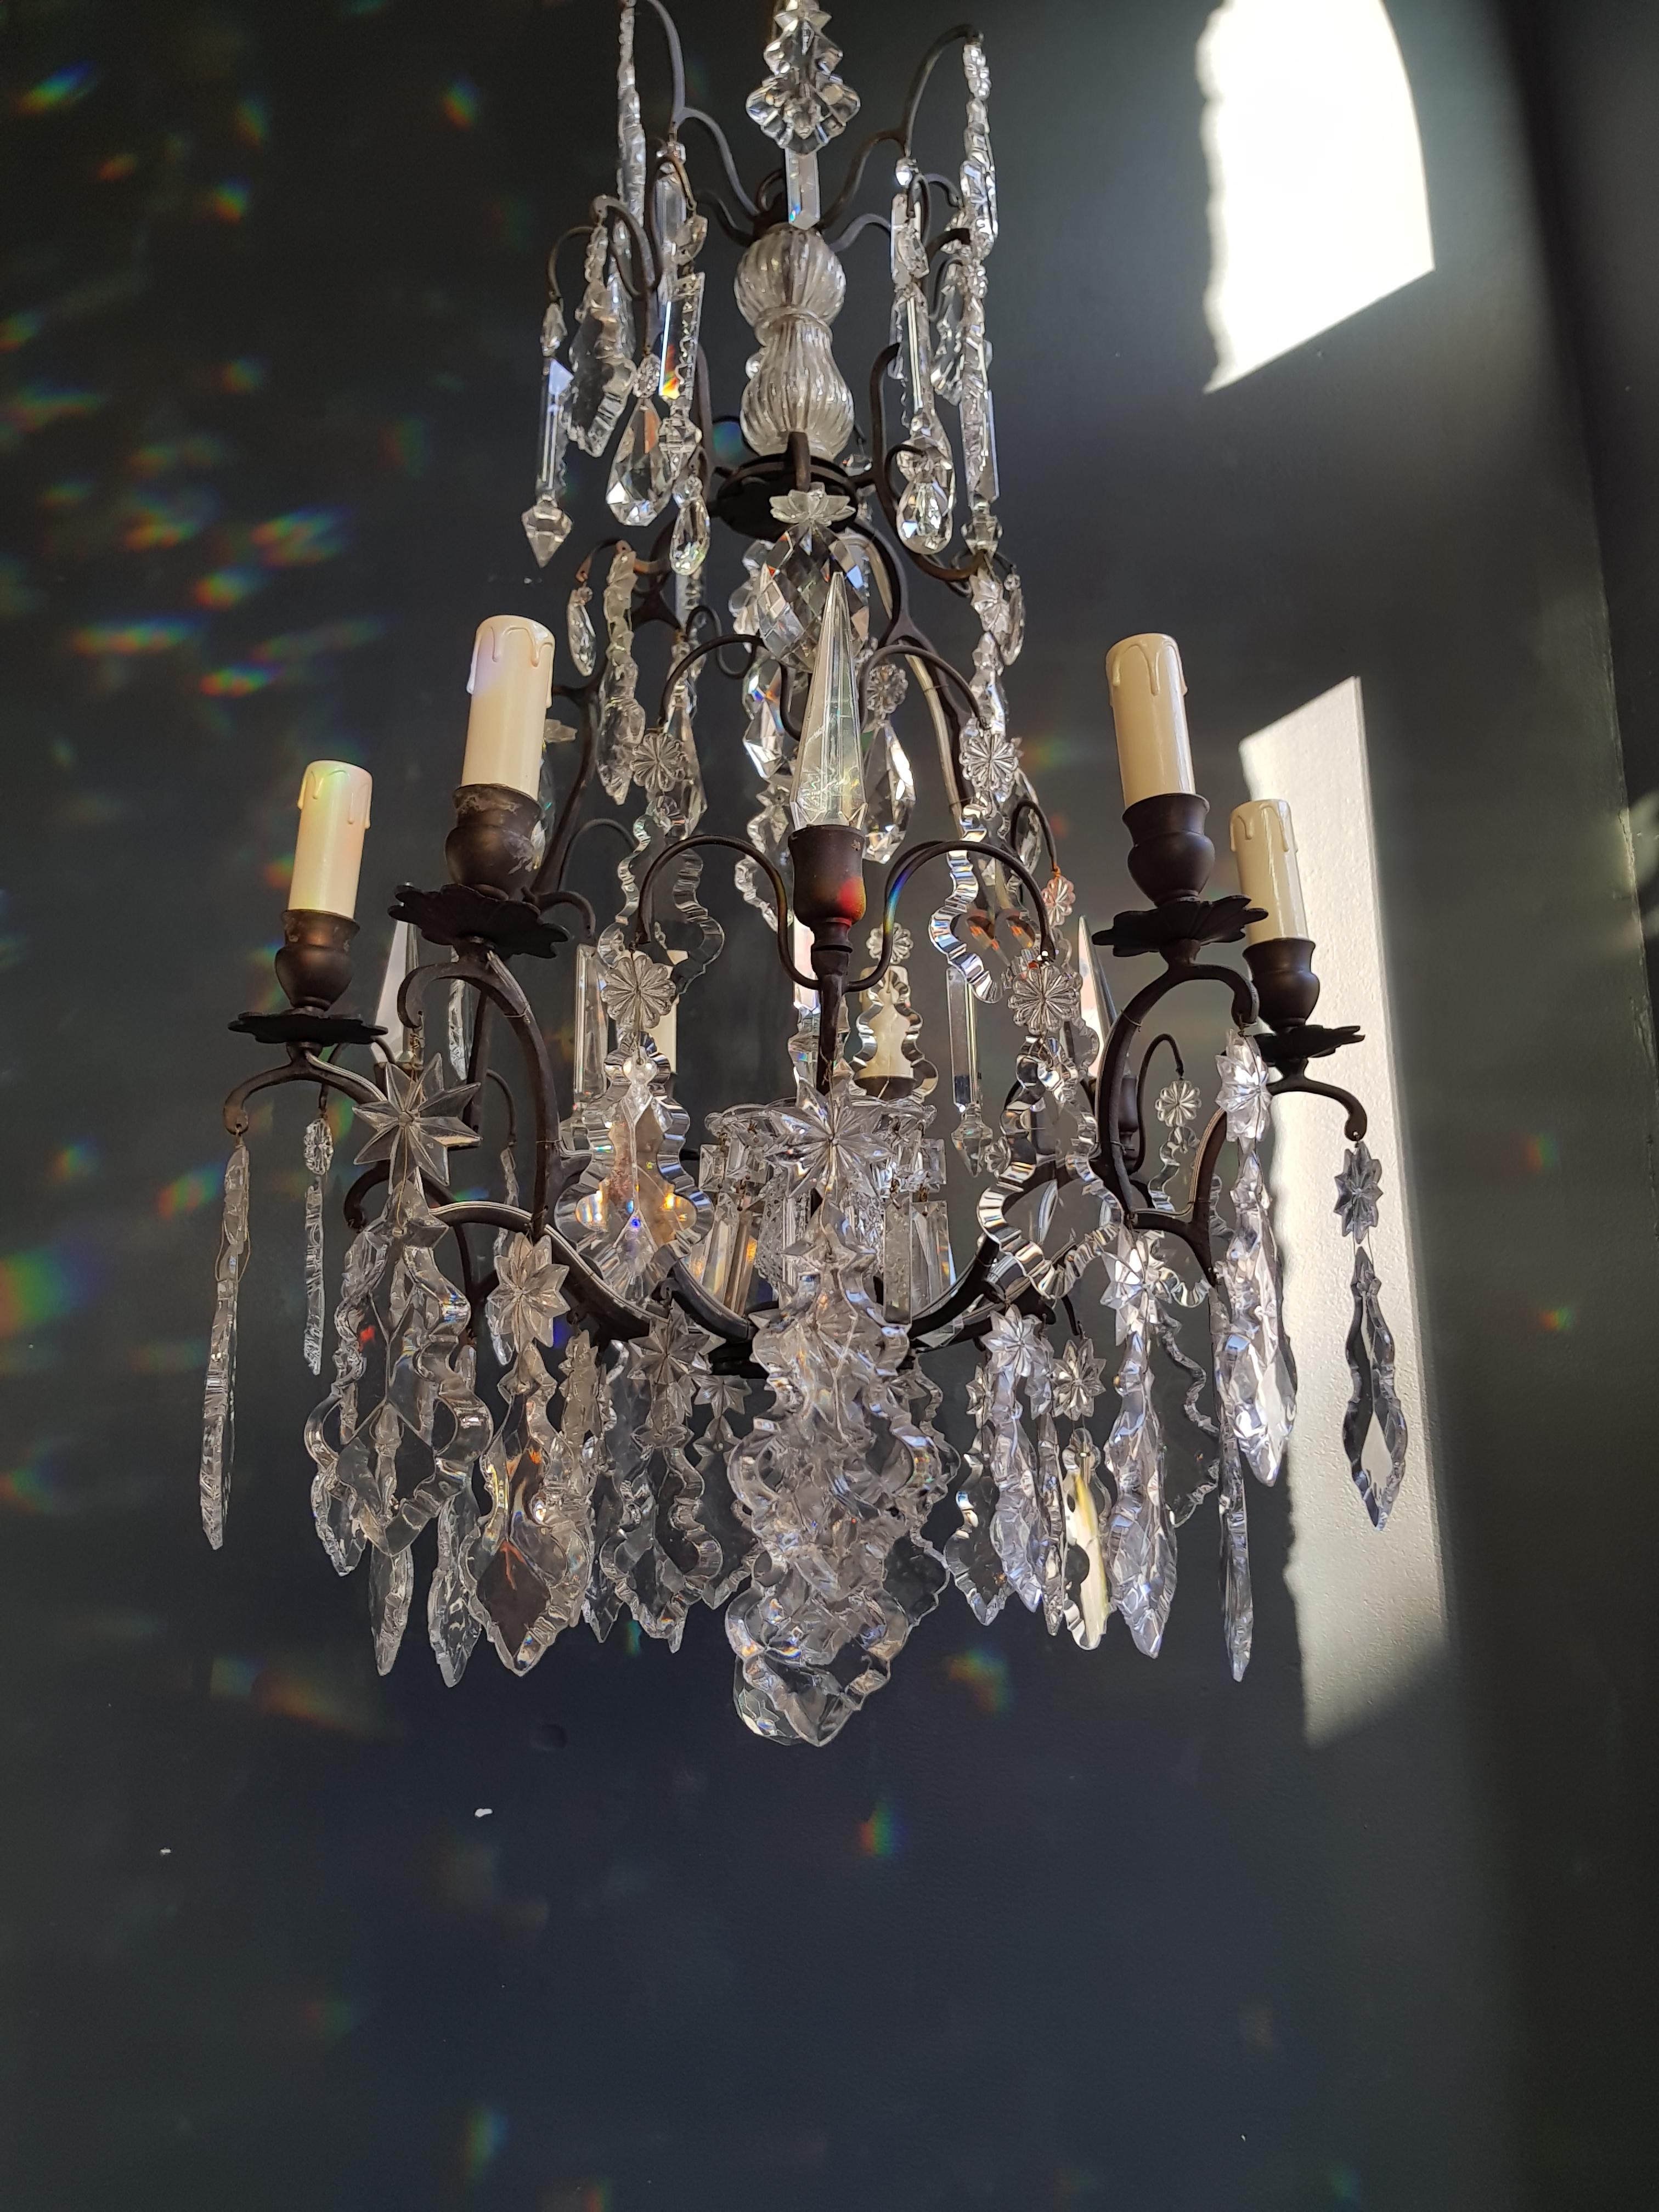 French Crystal Chandelier - Antique Ceiling Lamp Exuding Art Nouveau Elegance

Introducing an exquisite French crystal chandelier that embodies the opulence and grace of an antique era, enriched by the Art Nouveau style.

Meticulously Restored